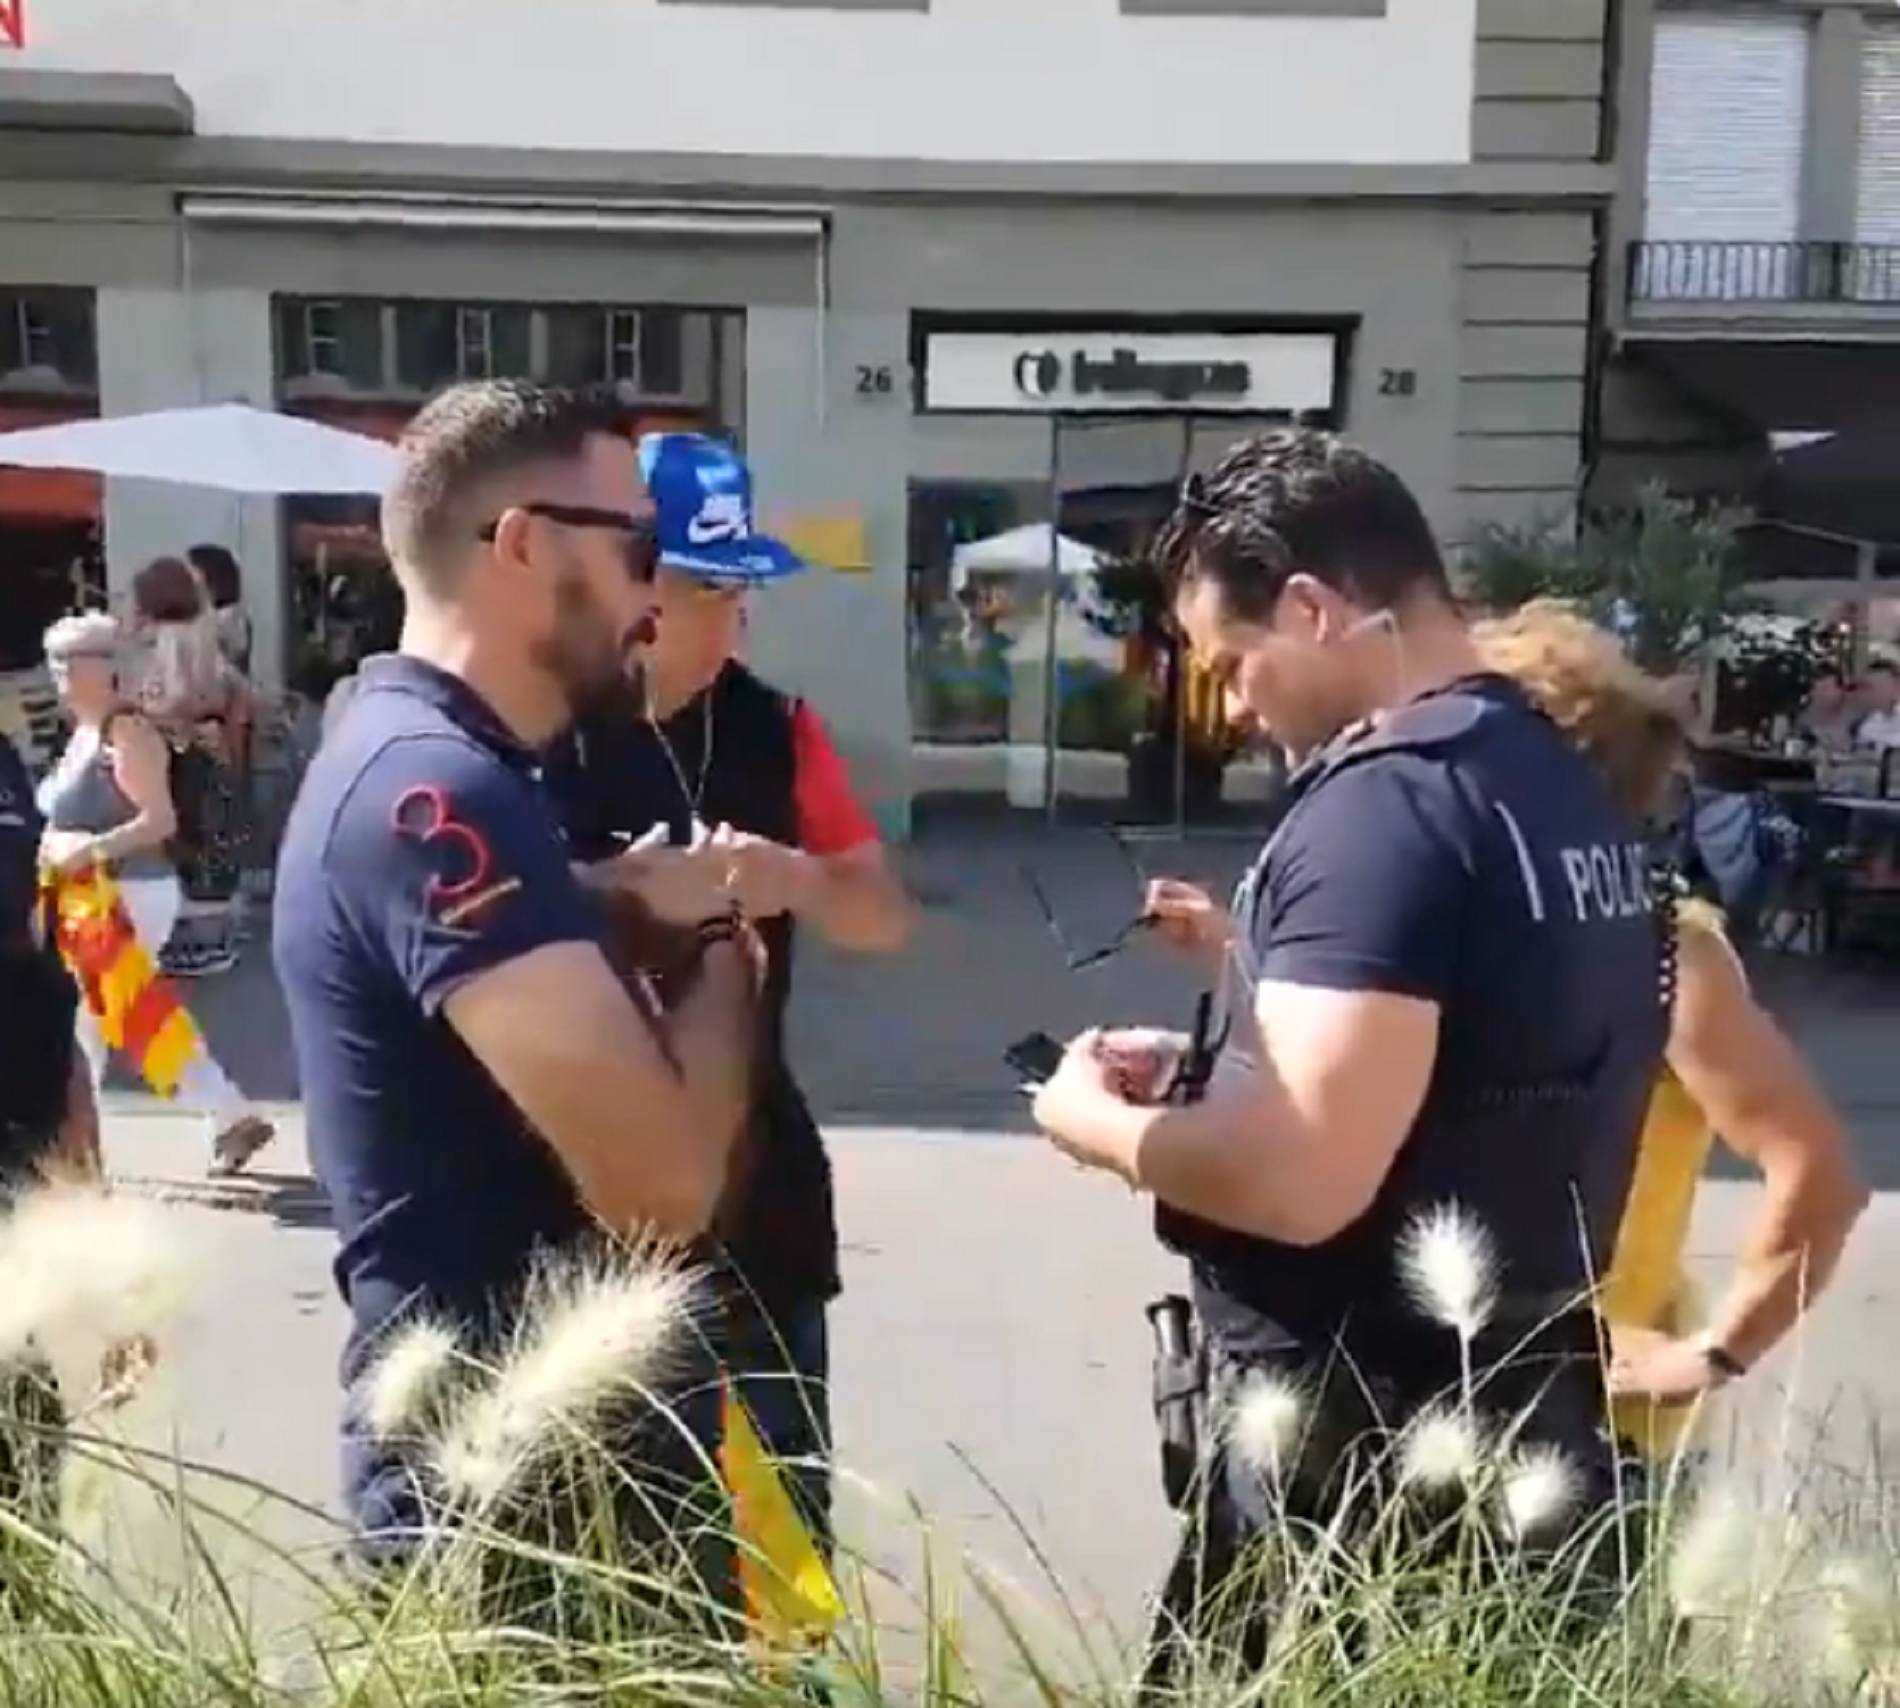 Swiss police identify provocateurs at Catalan independence event in Bern